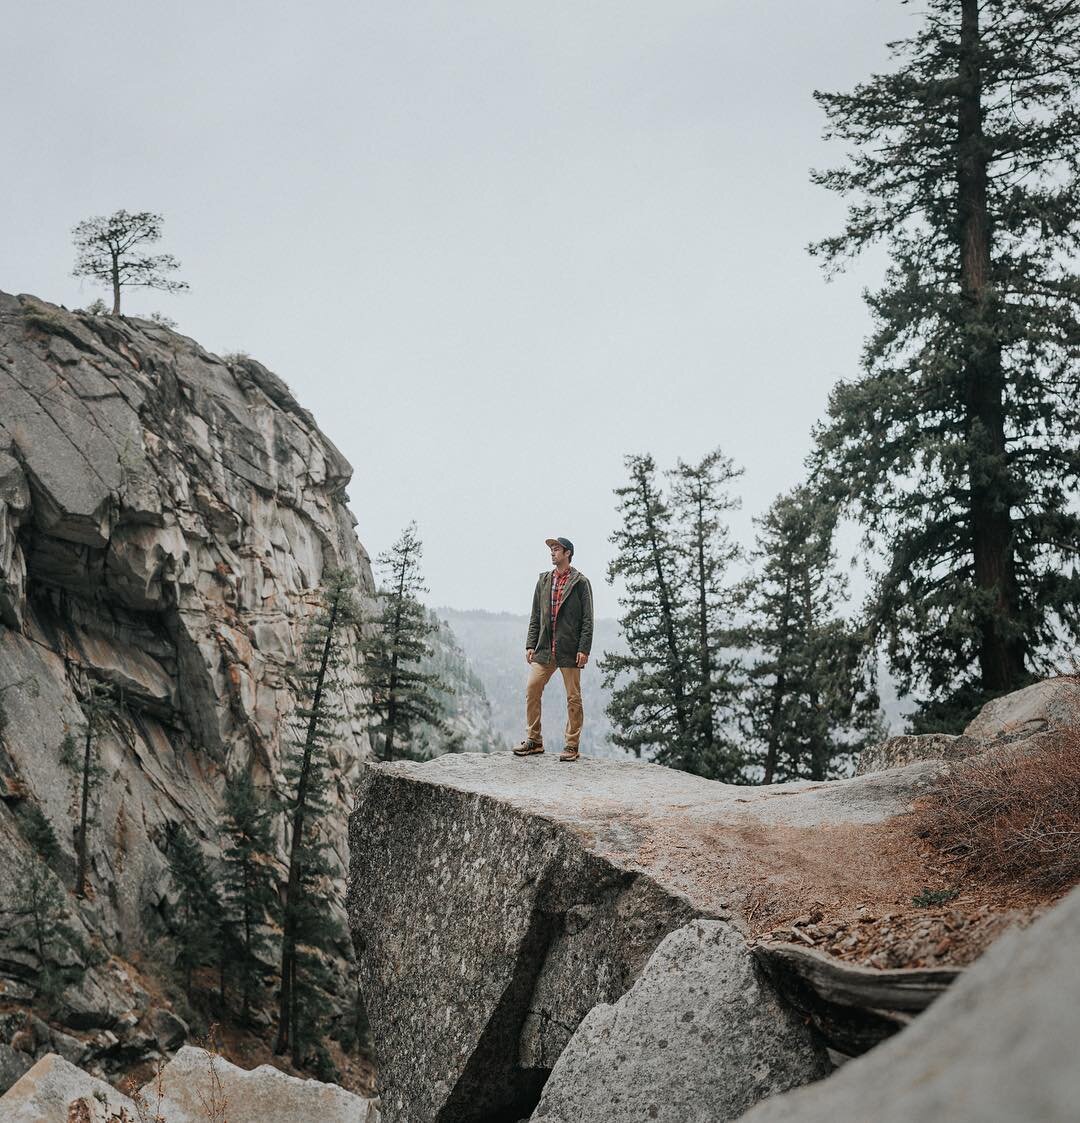 A few weeks ago @kalebseaton and I did a little road trip up to Yosemite National Park. We wanted to get a good hike in so we found a healthy 5 mile looping hike on our map that hit up two waterfalls and a promise of beautiful vistas. It didn&rsquo;t